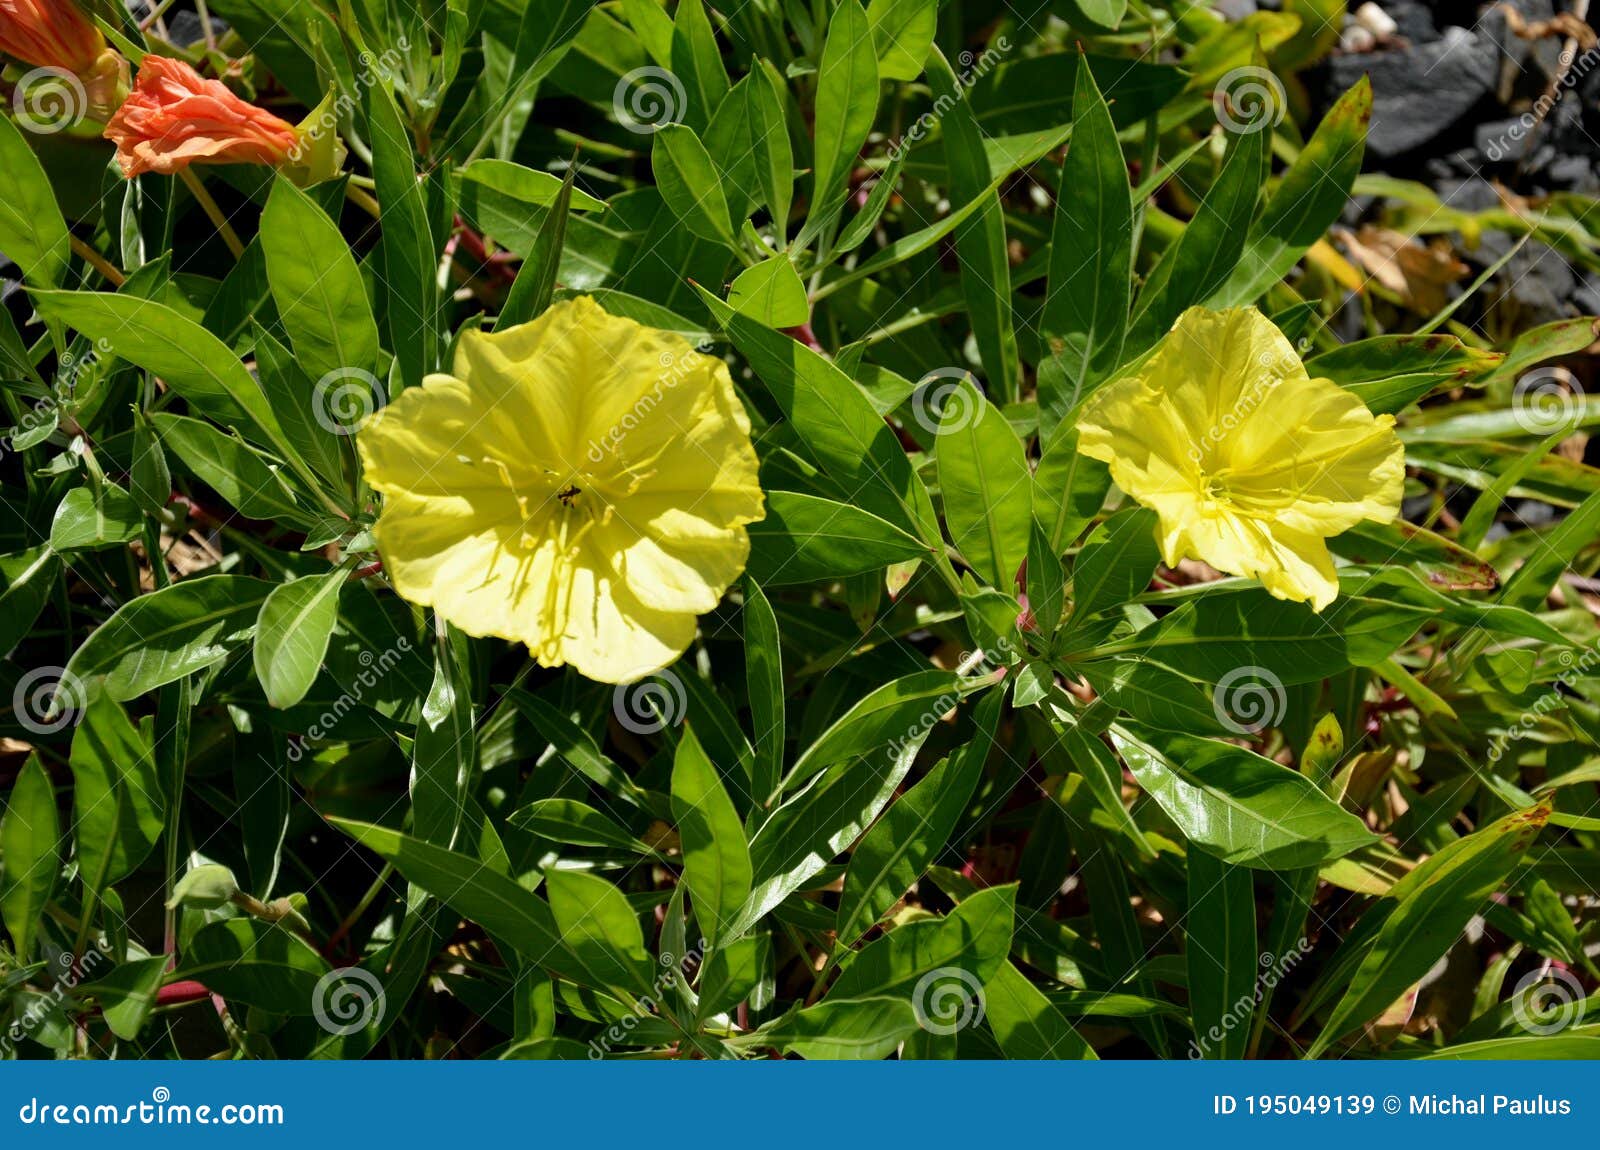 the large-fruited evening primrose will captivate you and attract you with its bright, yellow flowers, which open in the early